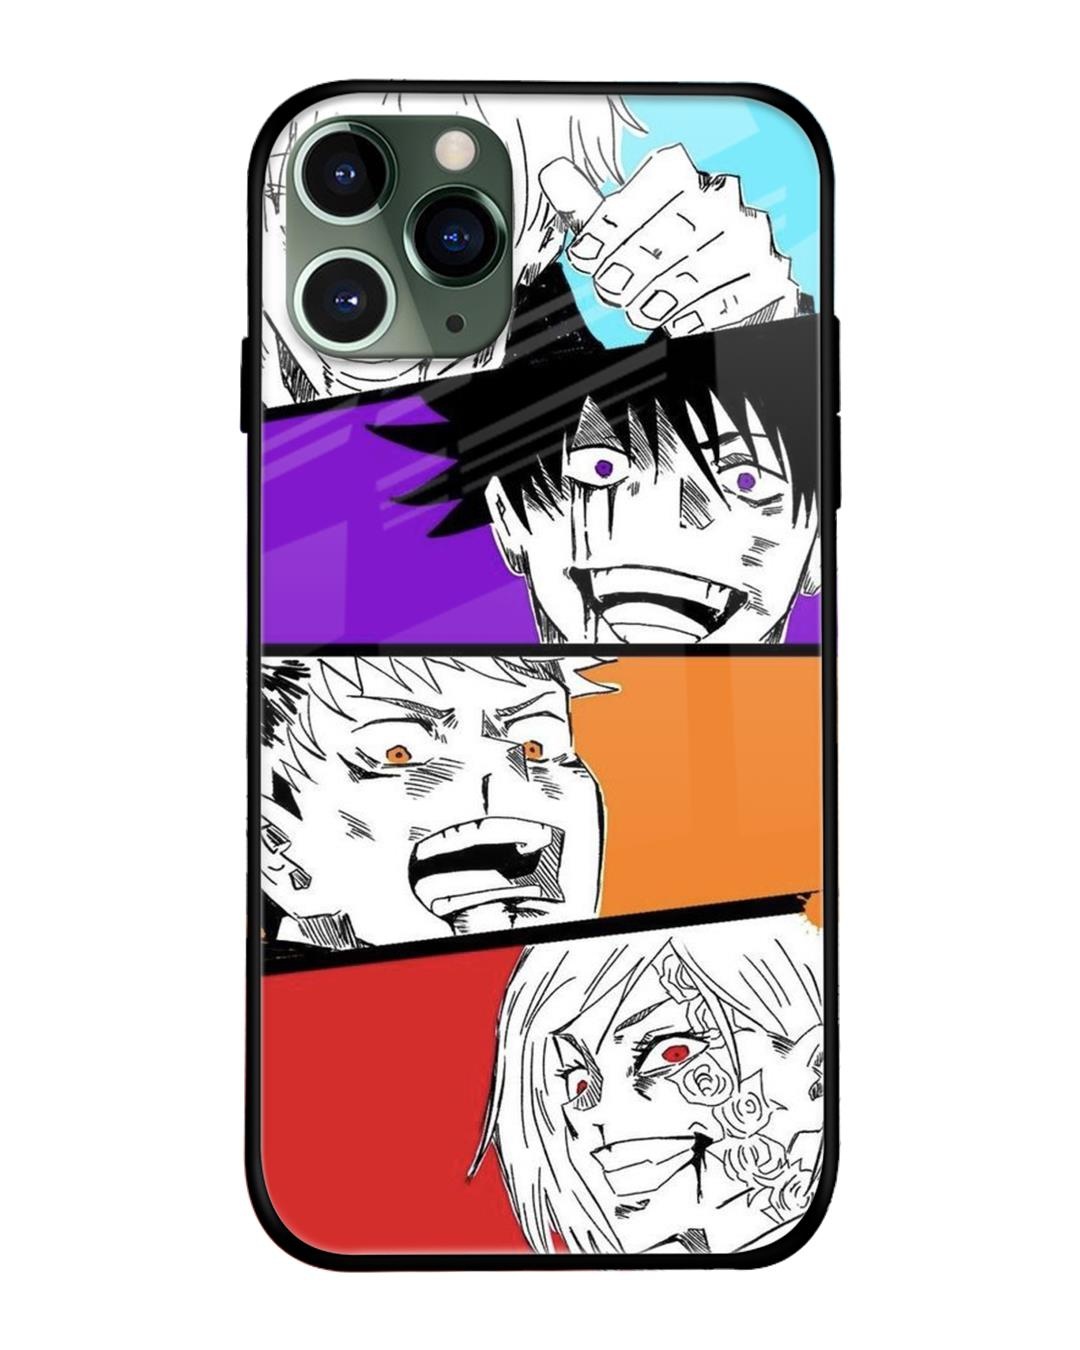 Cover Iphone 6 One Piece Luffy  Case Iphone Se One Piece Luffy  Anime One  Piece  Aliexpress